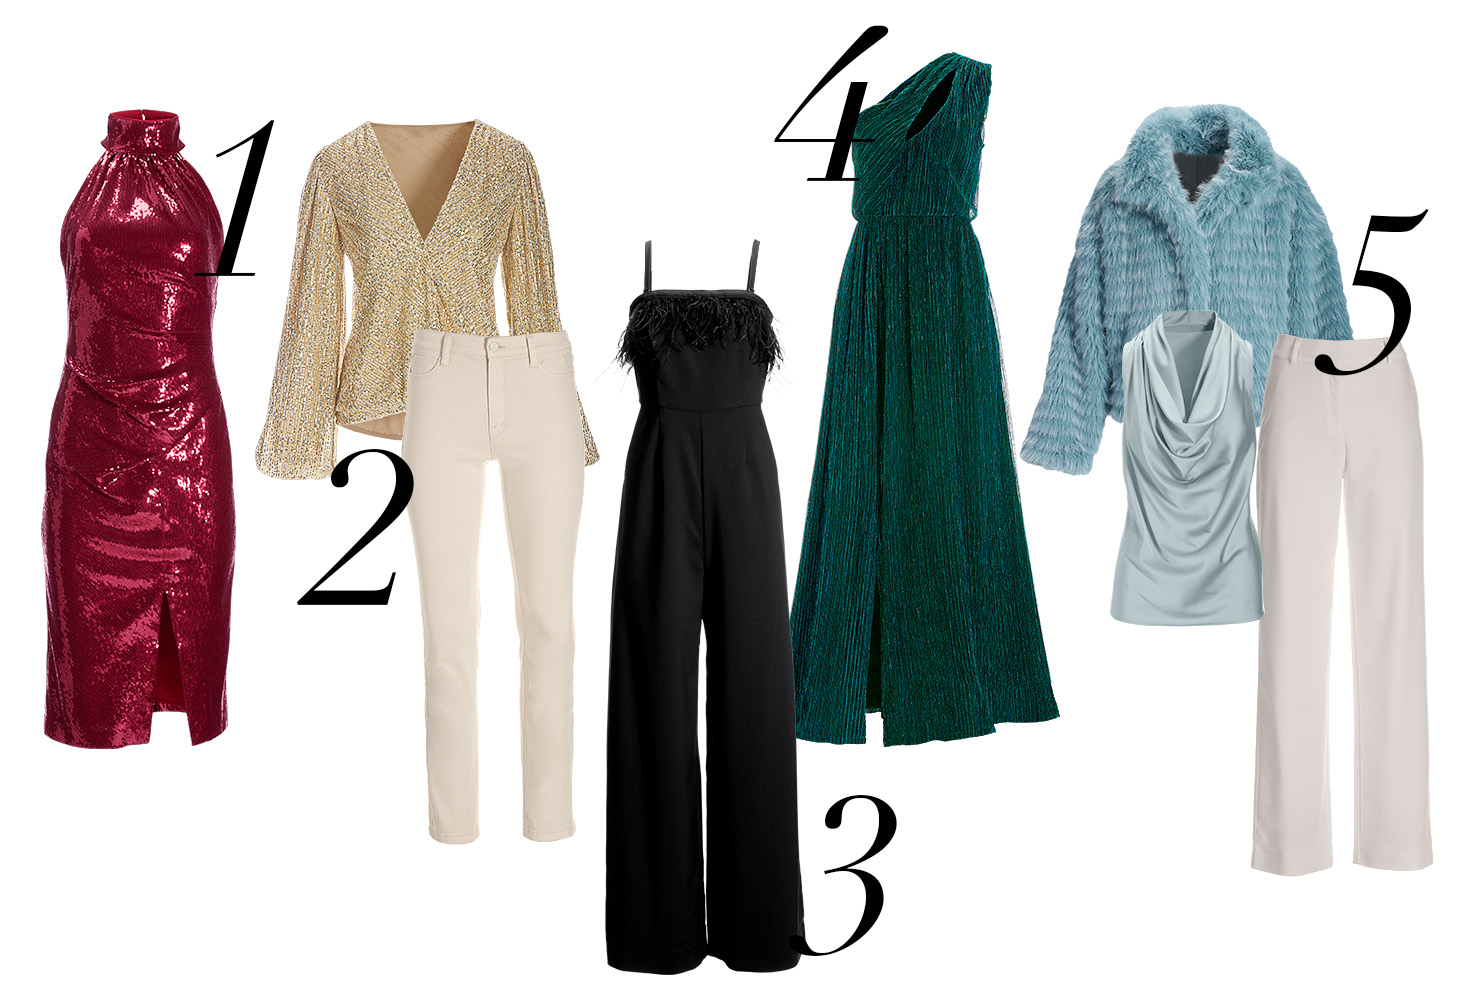 from left to right: red sequin mock-neck sleeveless midi dress. gold sequin surplice long-sleeve top and cream colored jeans. black faux feather embellished sleeveless jumpsuit. green shimmery one-shoulder gown. blue faux-fur chubby coat, light blue cowl-neck sleeveless charmeuse blouse, and white trousers.